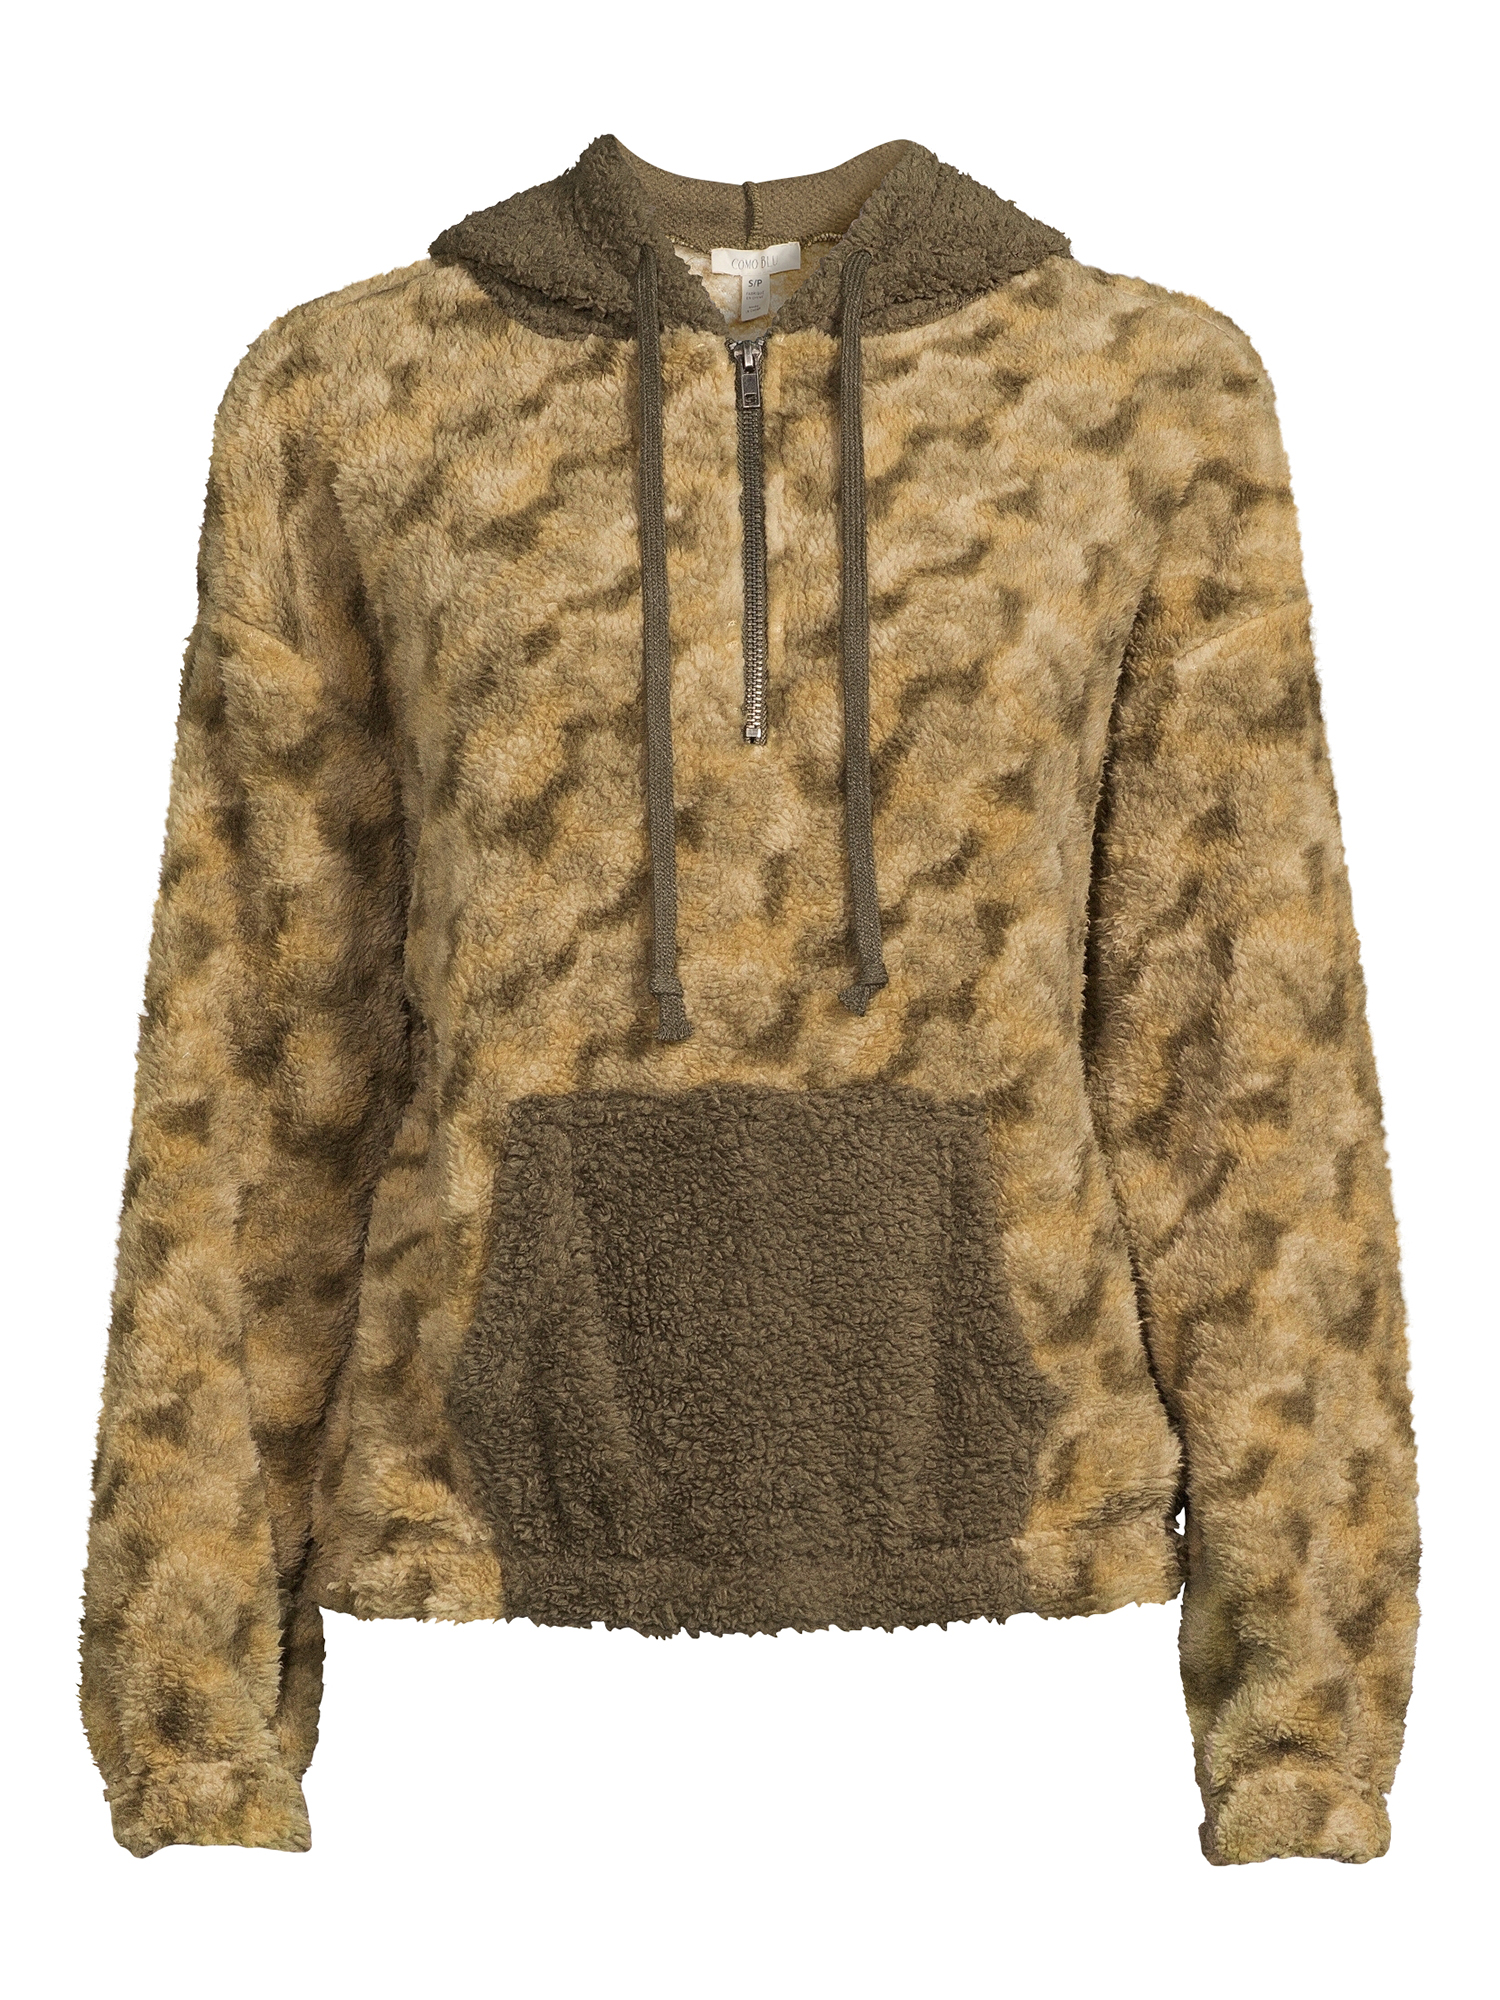 Como Blu Women's Athleisure Printed Baby Faux Sherpa Pullover - image 5 of 5